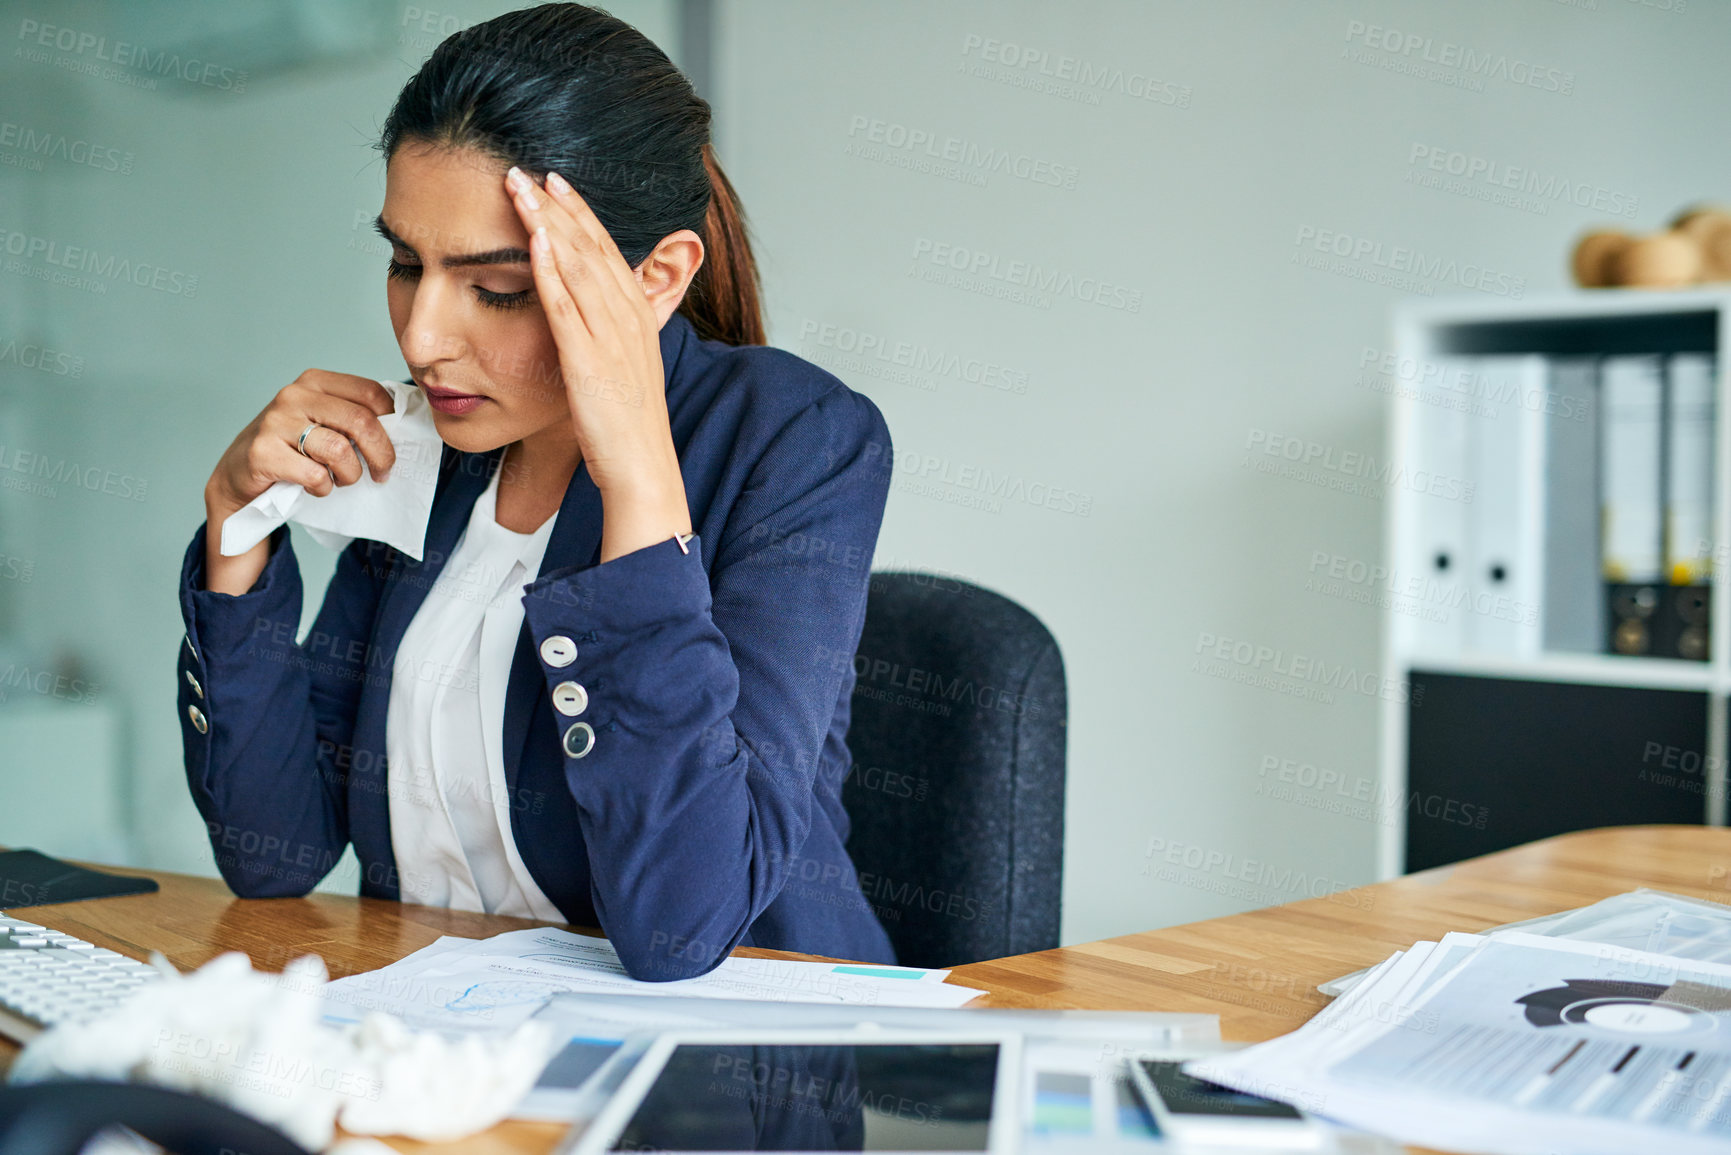 Buy stock photo Shot of a young businesswoman suffering with allergies at work